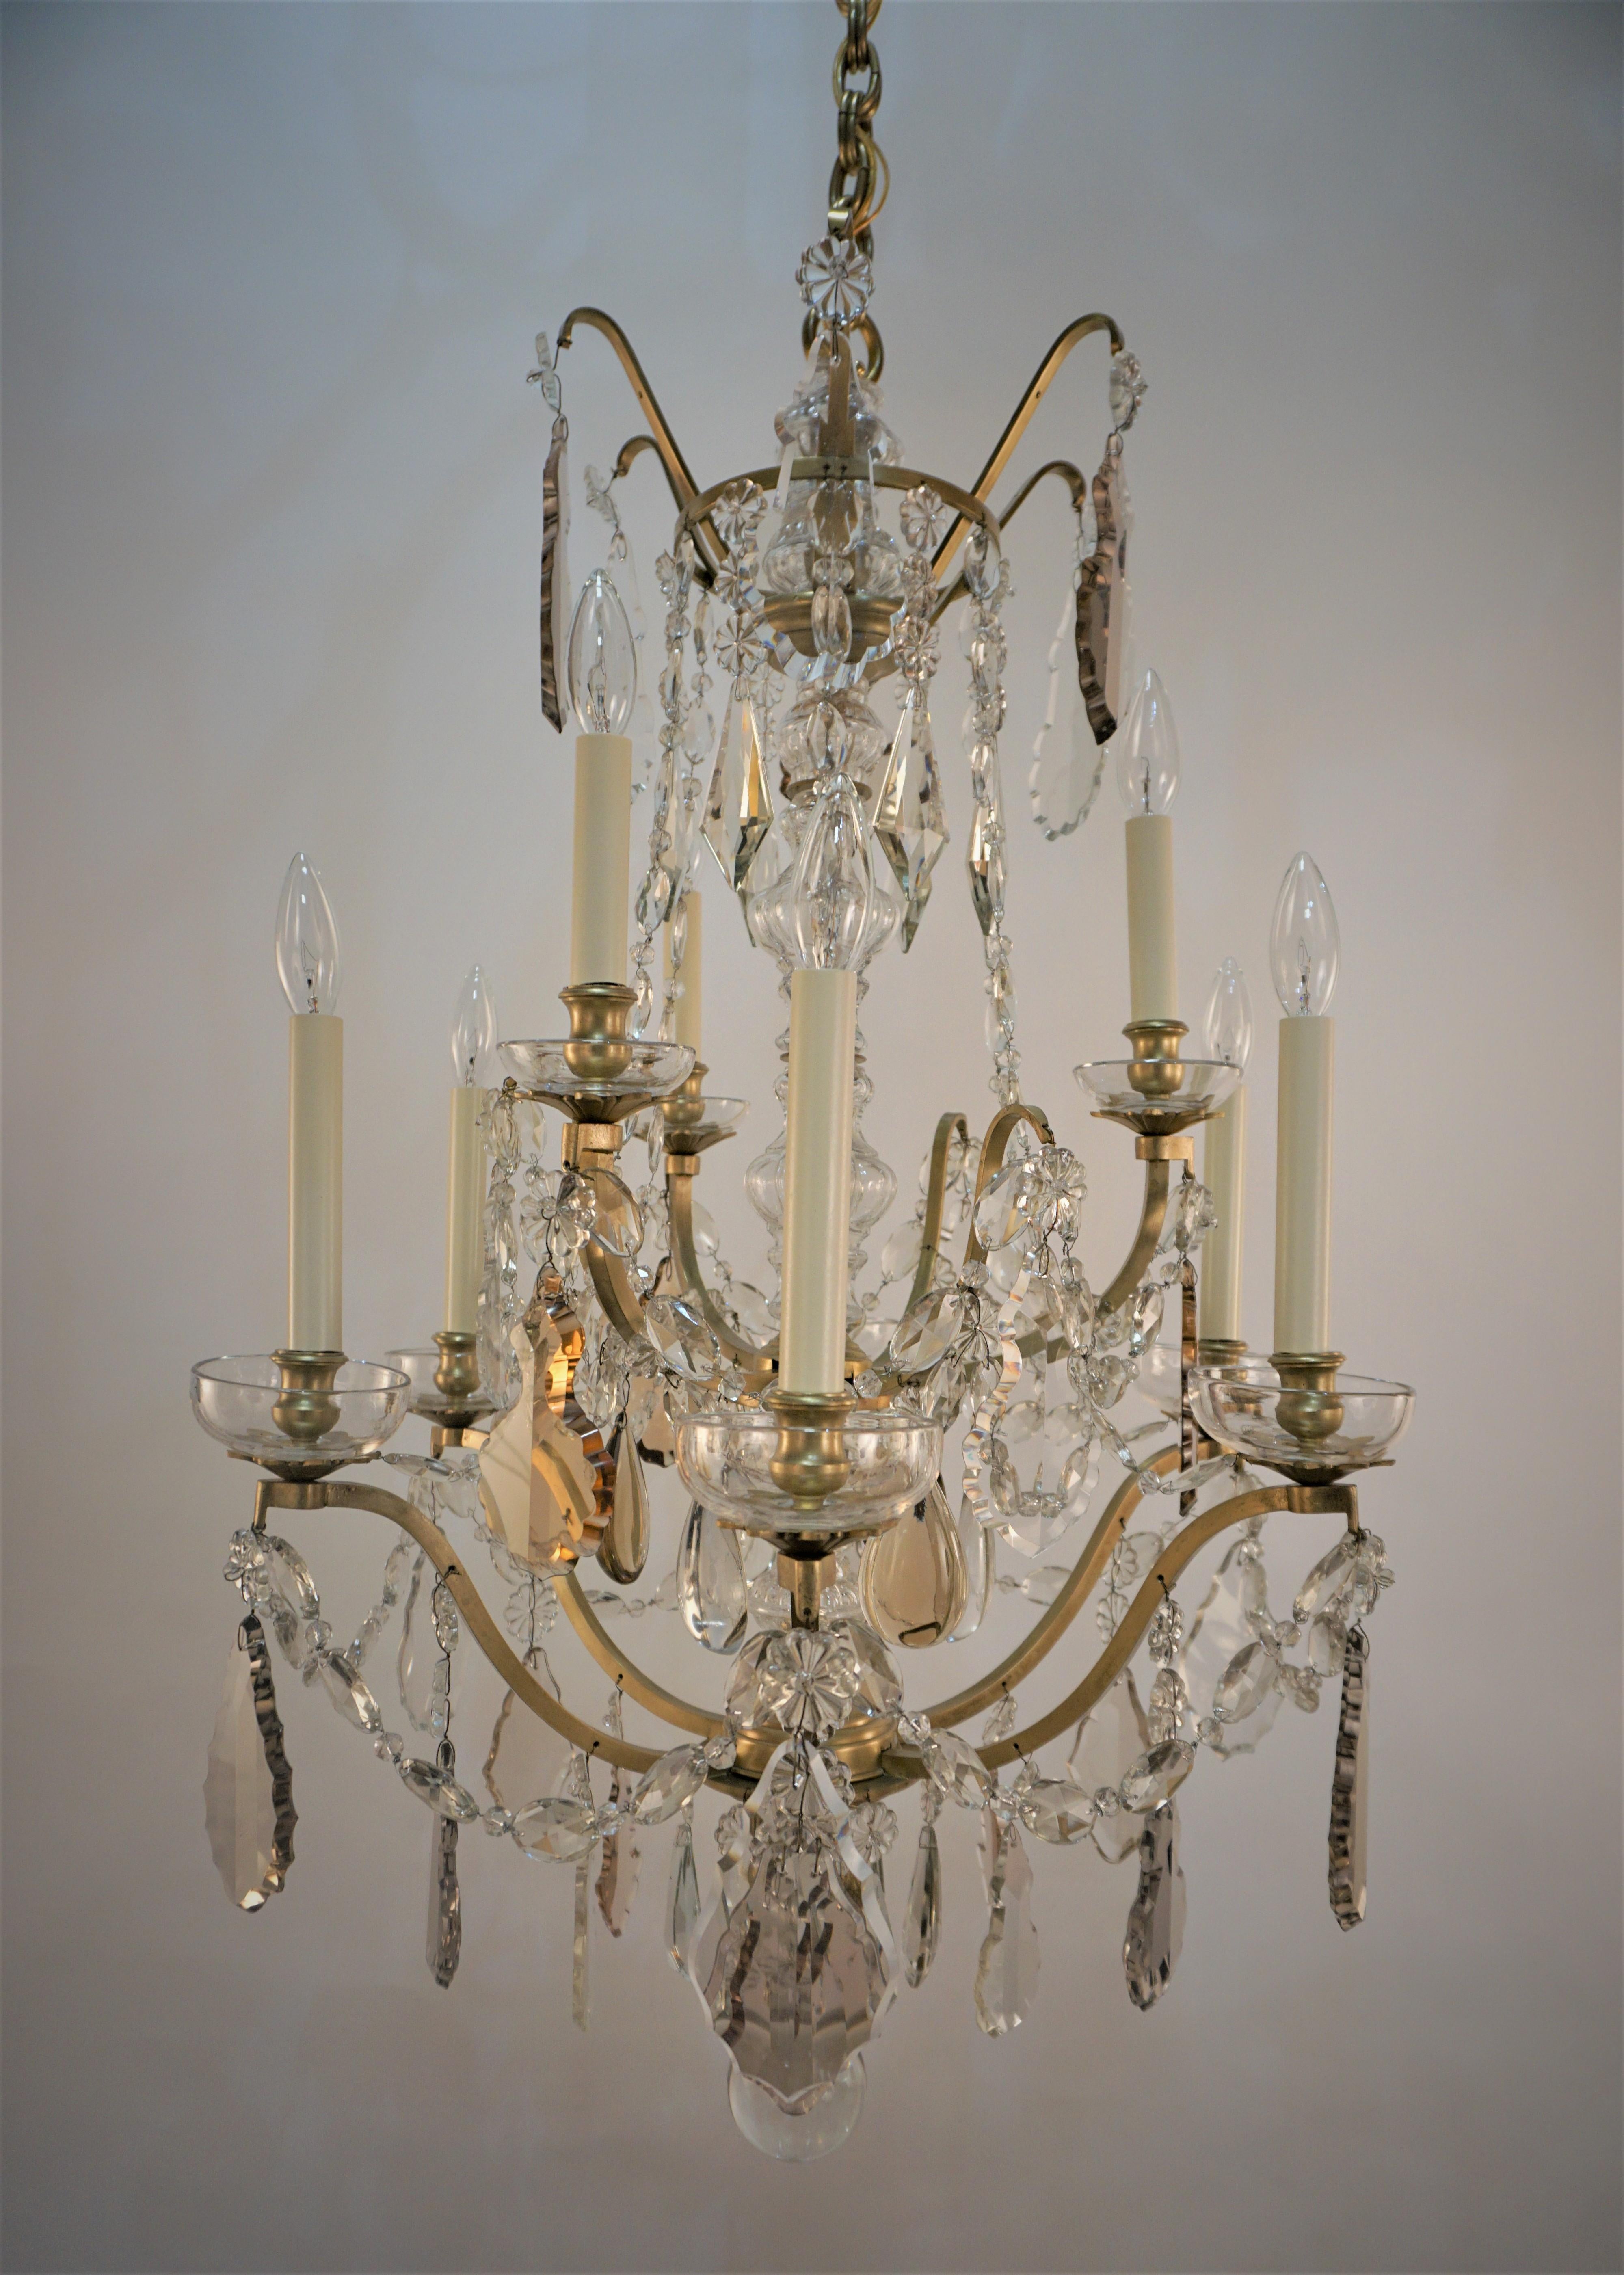 Bagues 1930s Crystal and Bronze Chandelier #2 For Sale 6